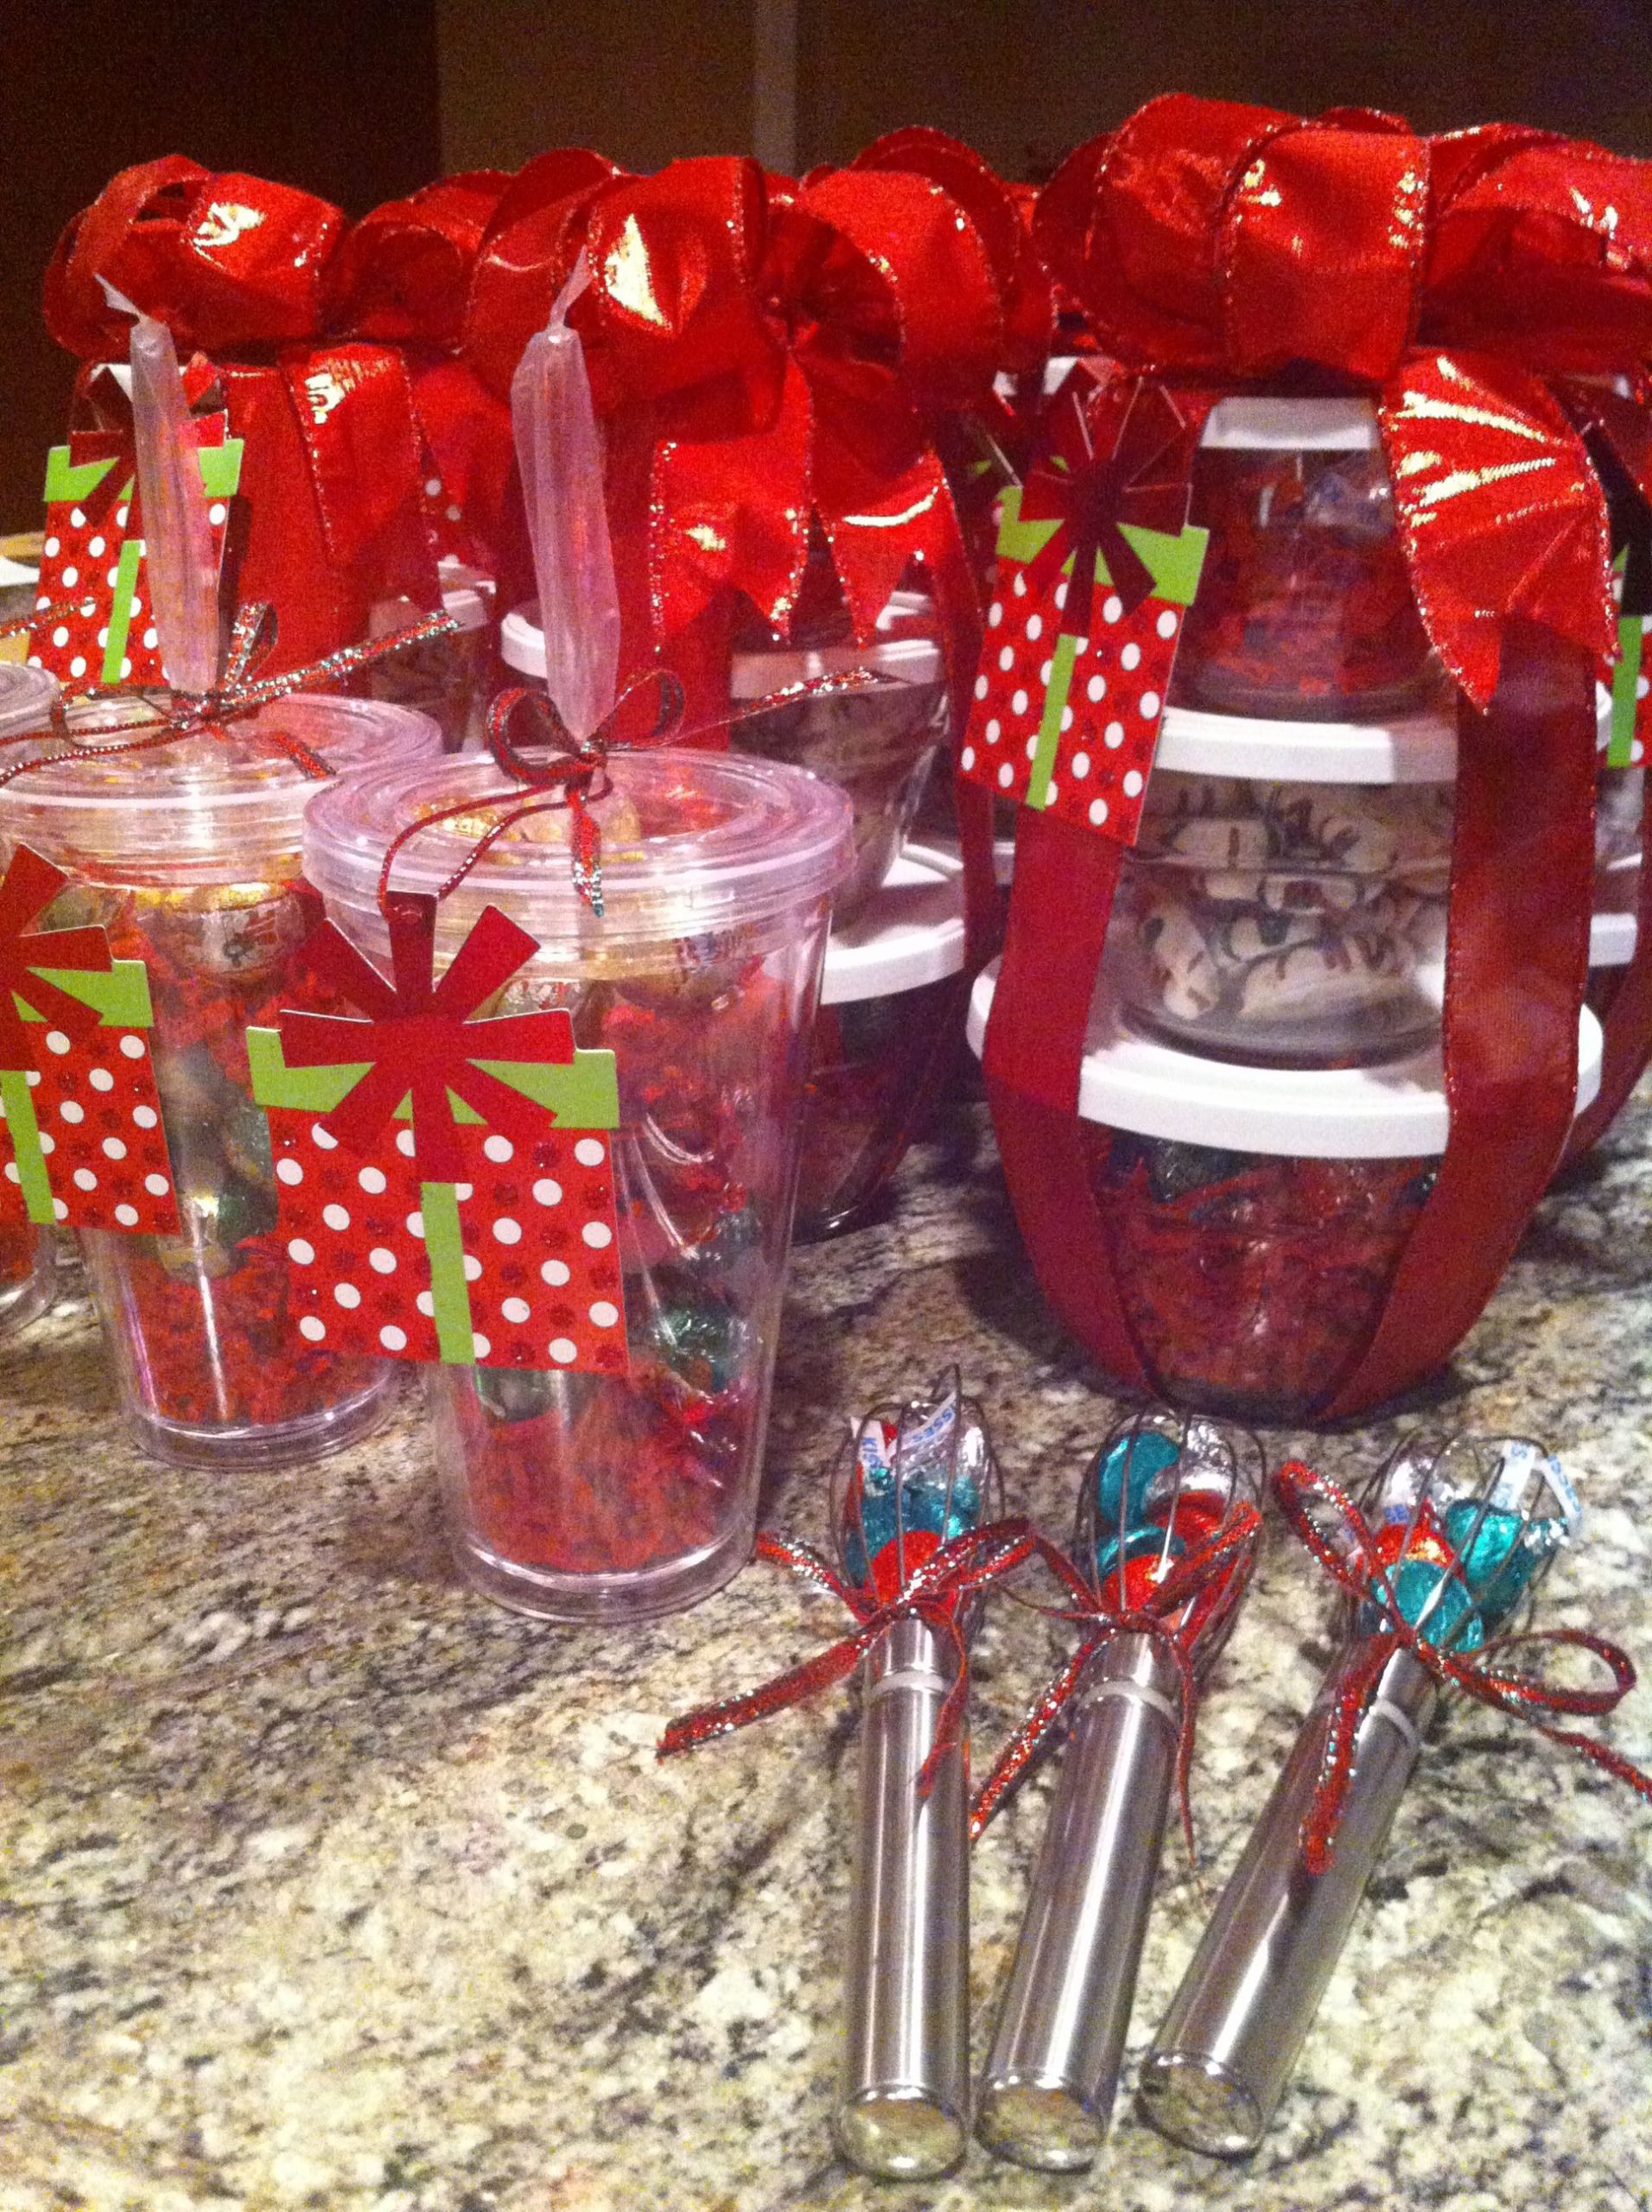 Fun Holiday Gift Ideas
 Fun Christmas Gift Ideas I make these ahead of time to